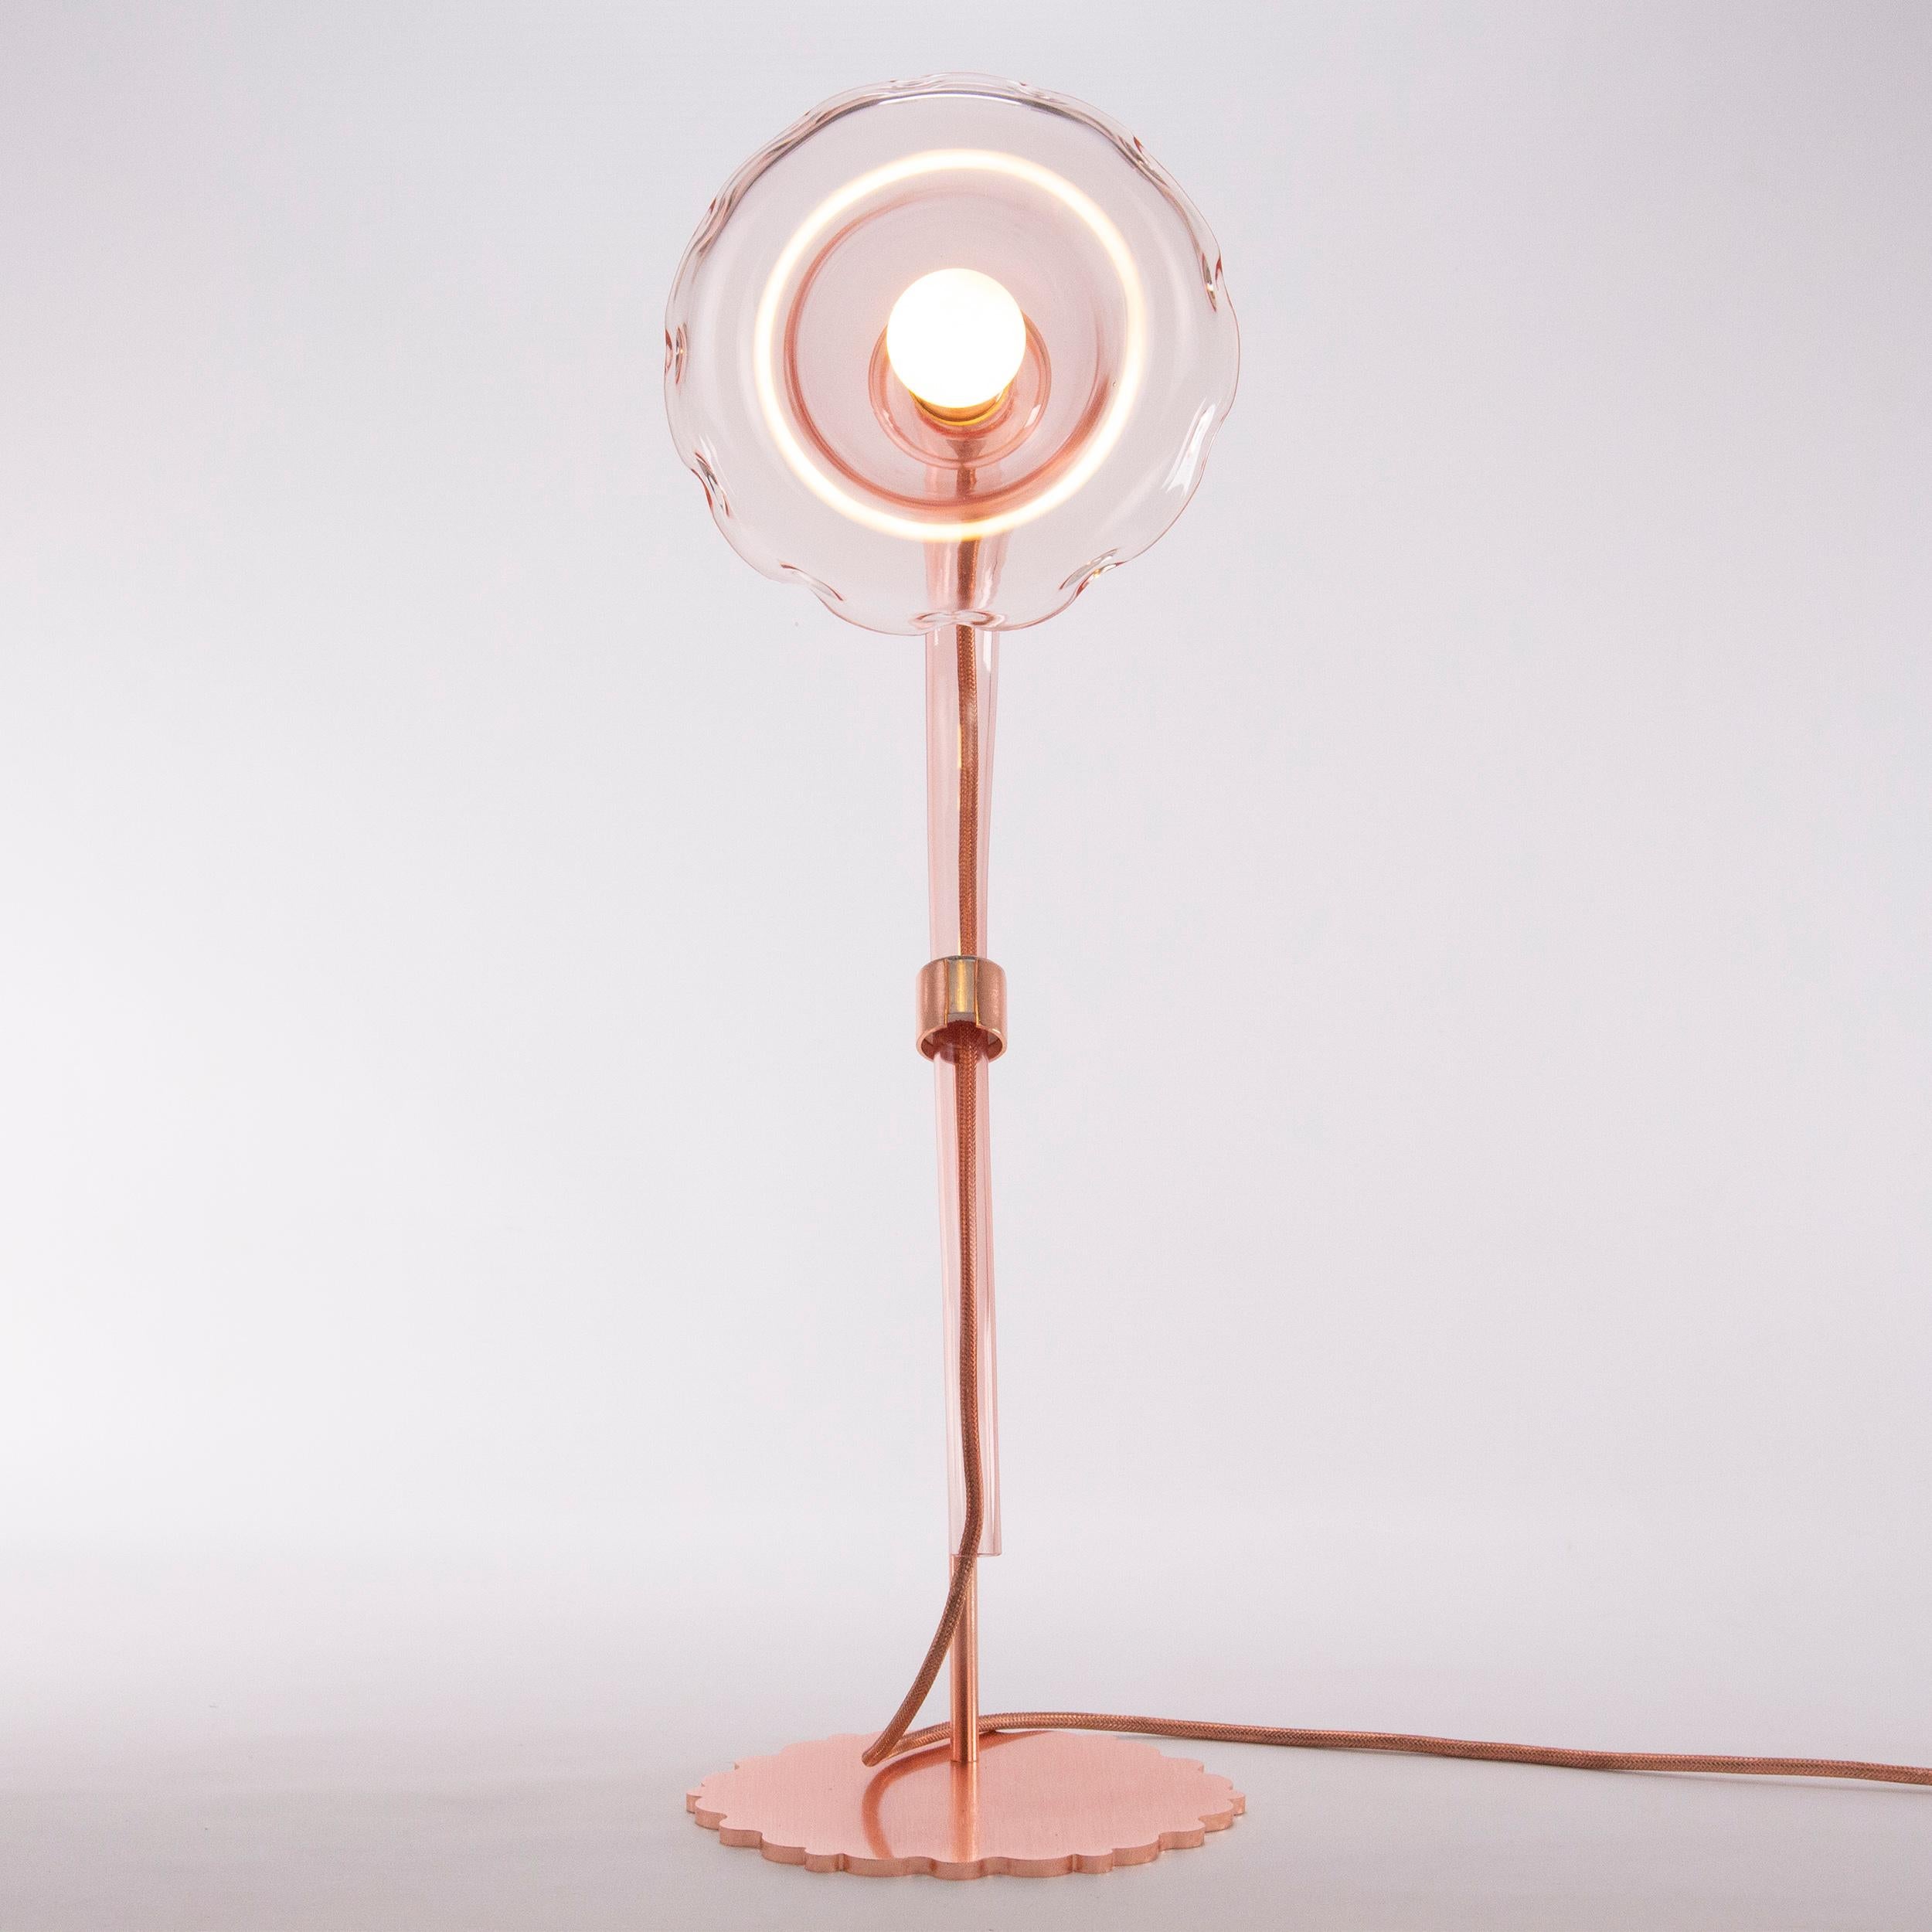 Italian Artistic Floral Table Lamp 1 Arm Pink Murano Glass Ikebana by Multiforme For Sale